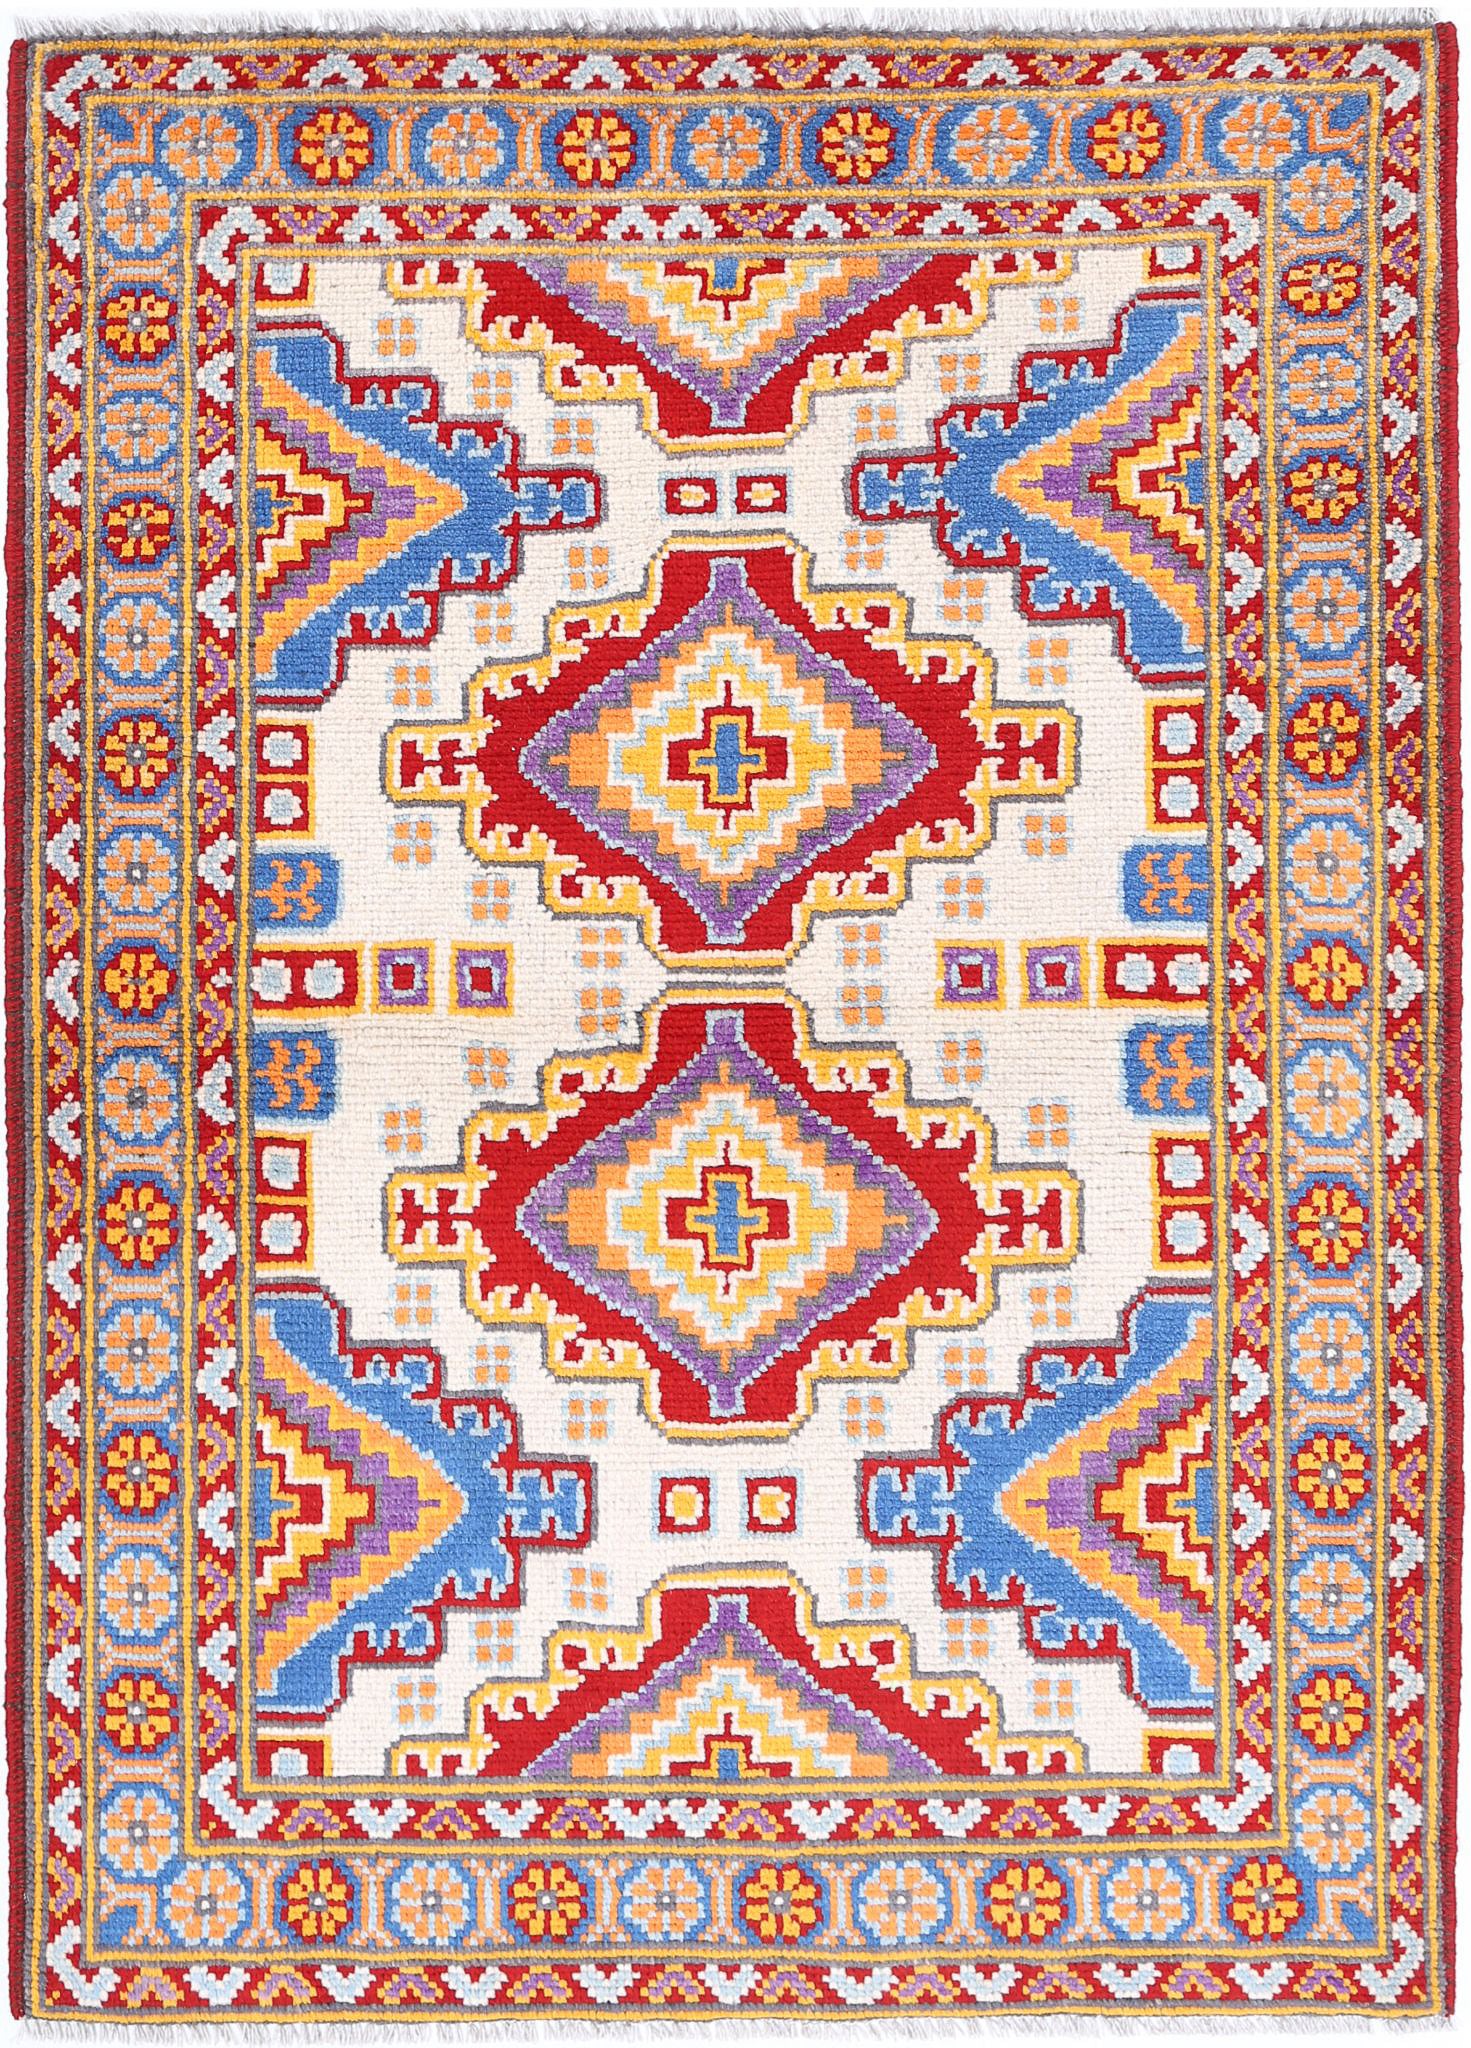 Revival-hand-knotted-qarghani-wool-rug-5014056.jpg